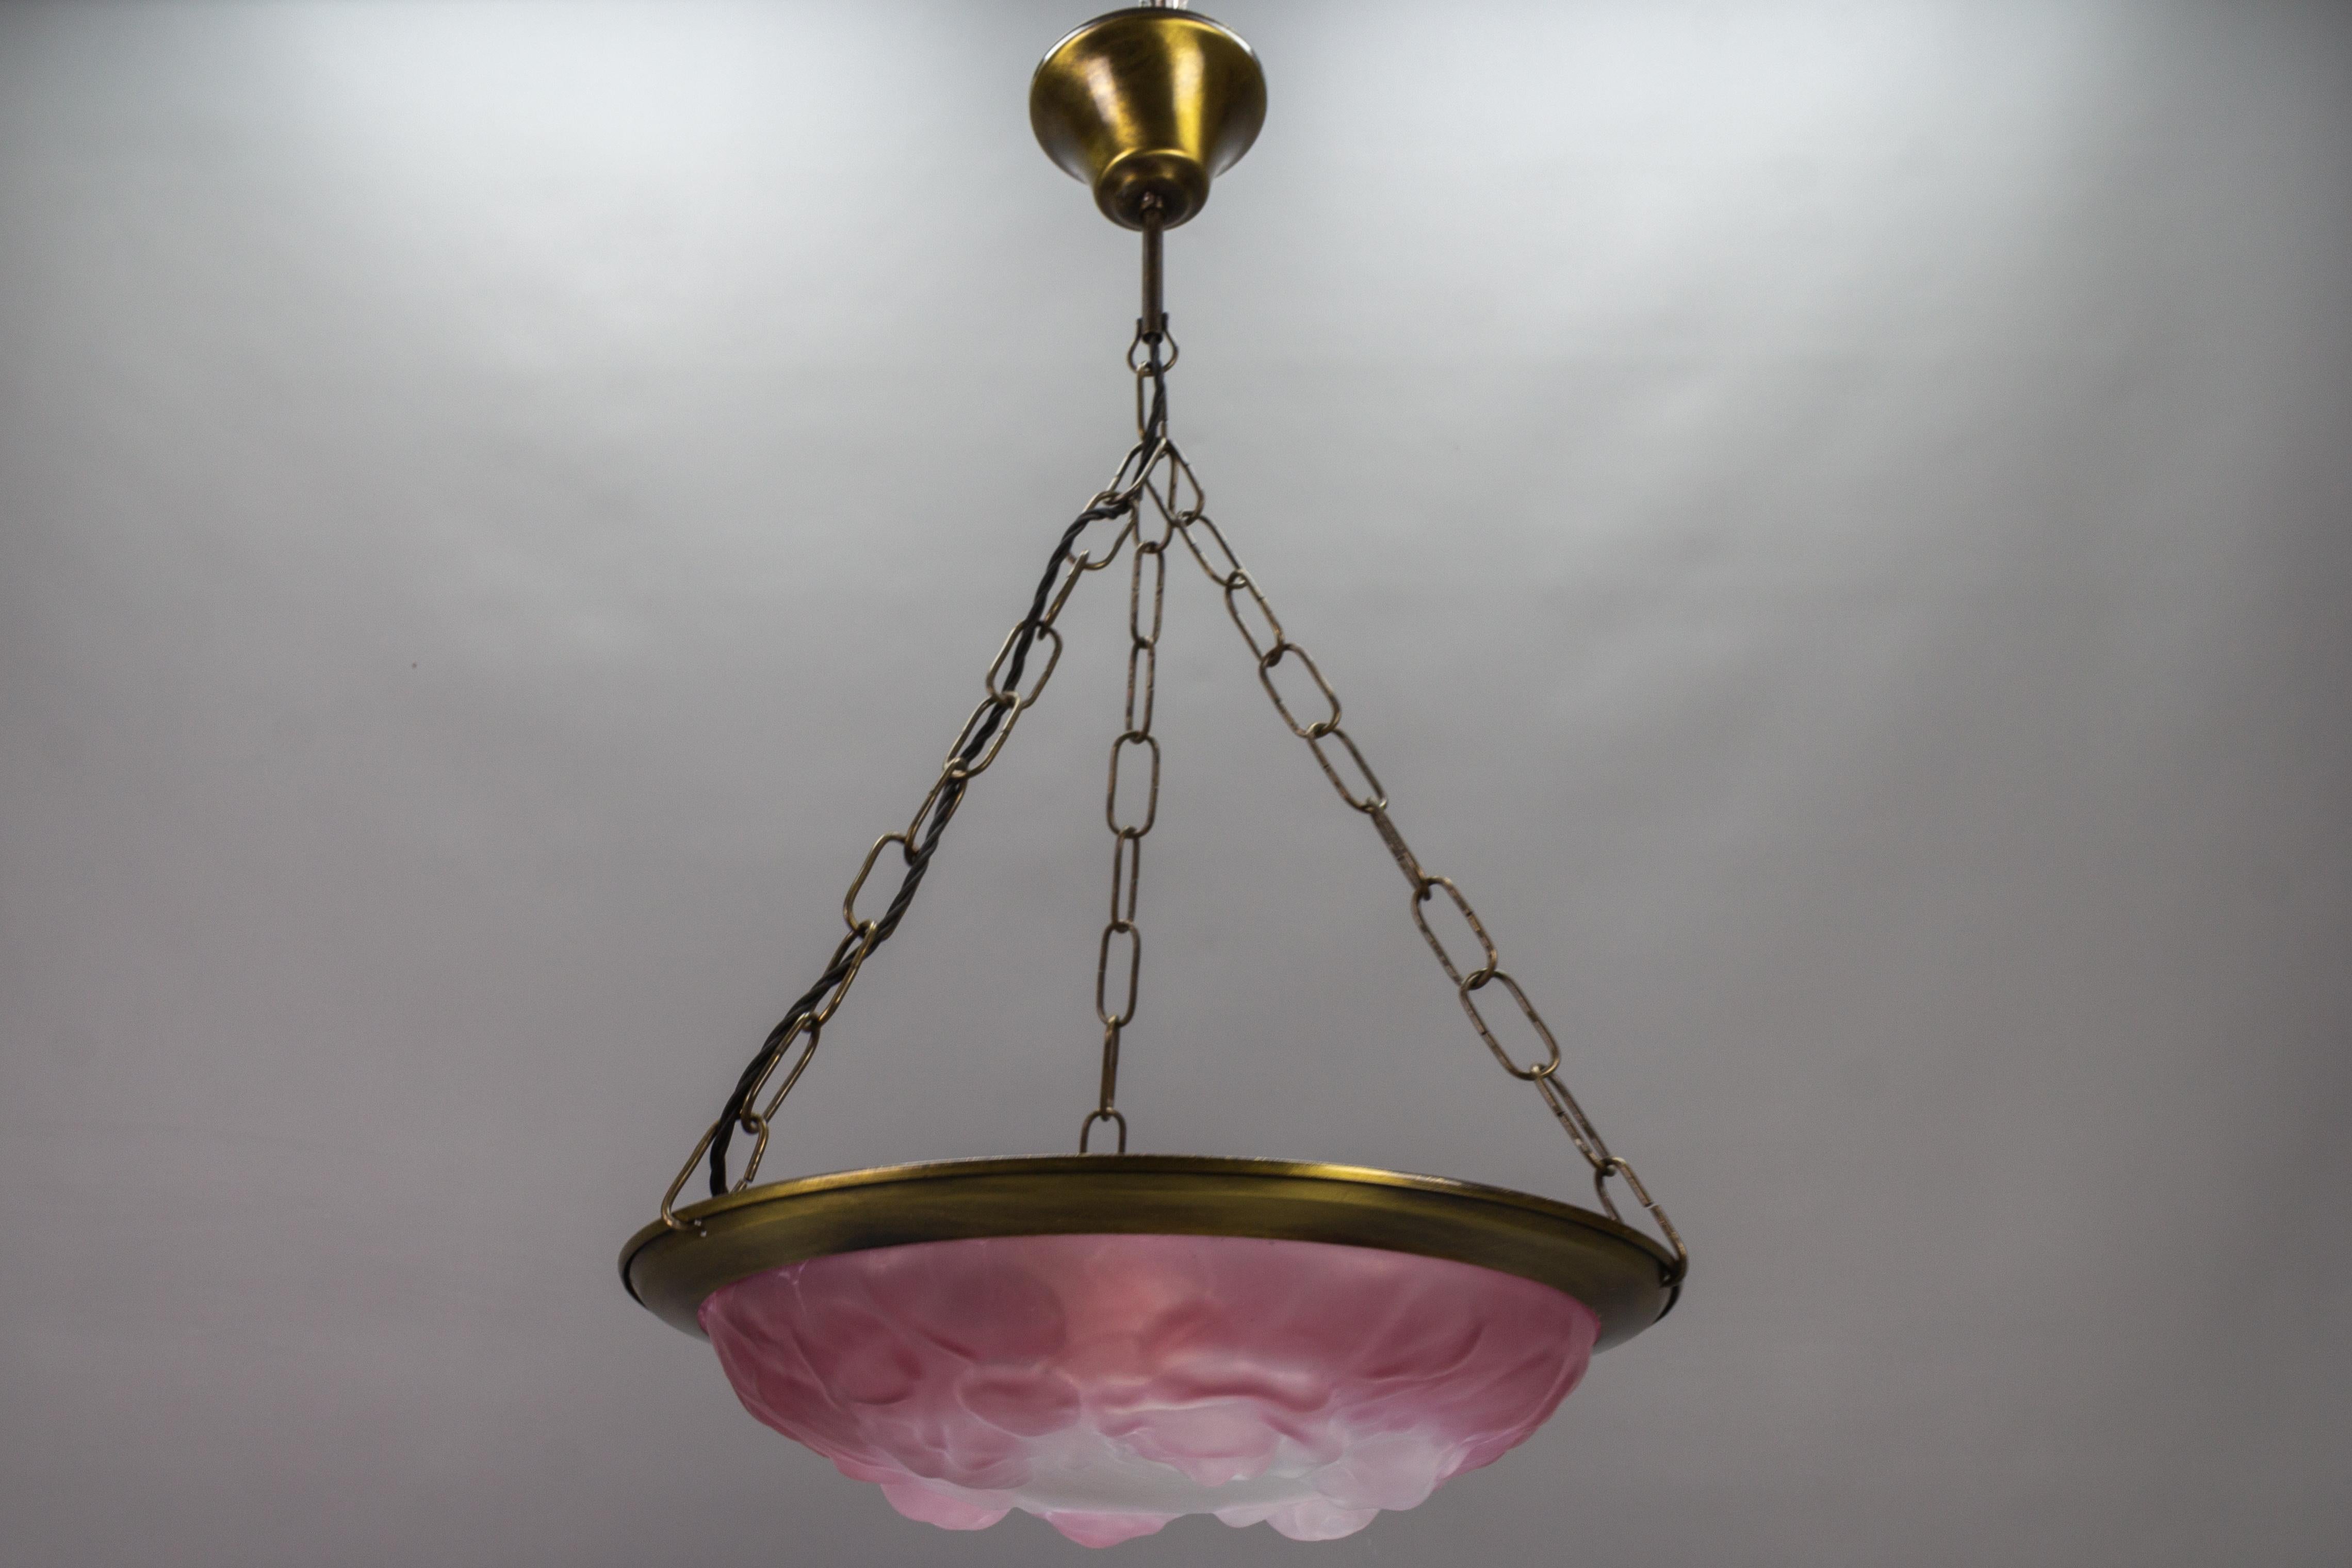 Frosted French Vintage Art Deco Style Pink and White Glass Pendant Light with Roses